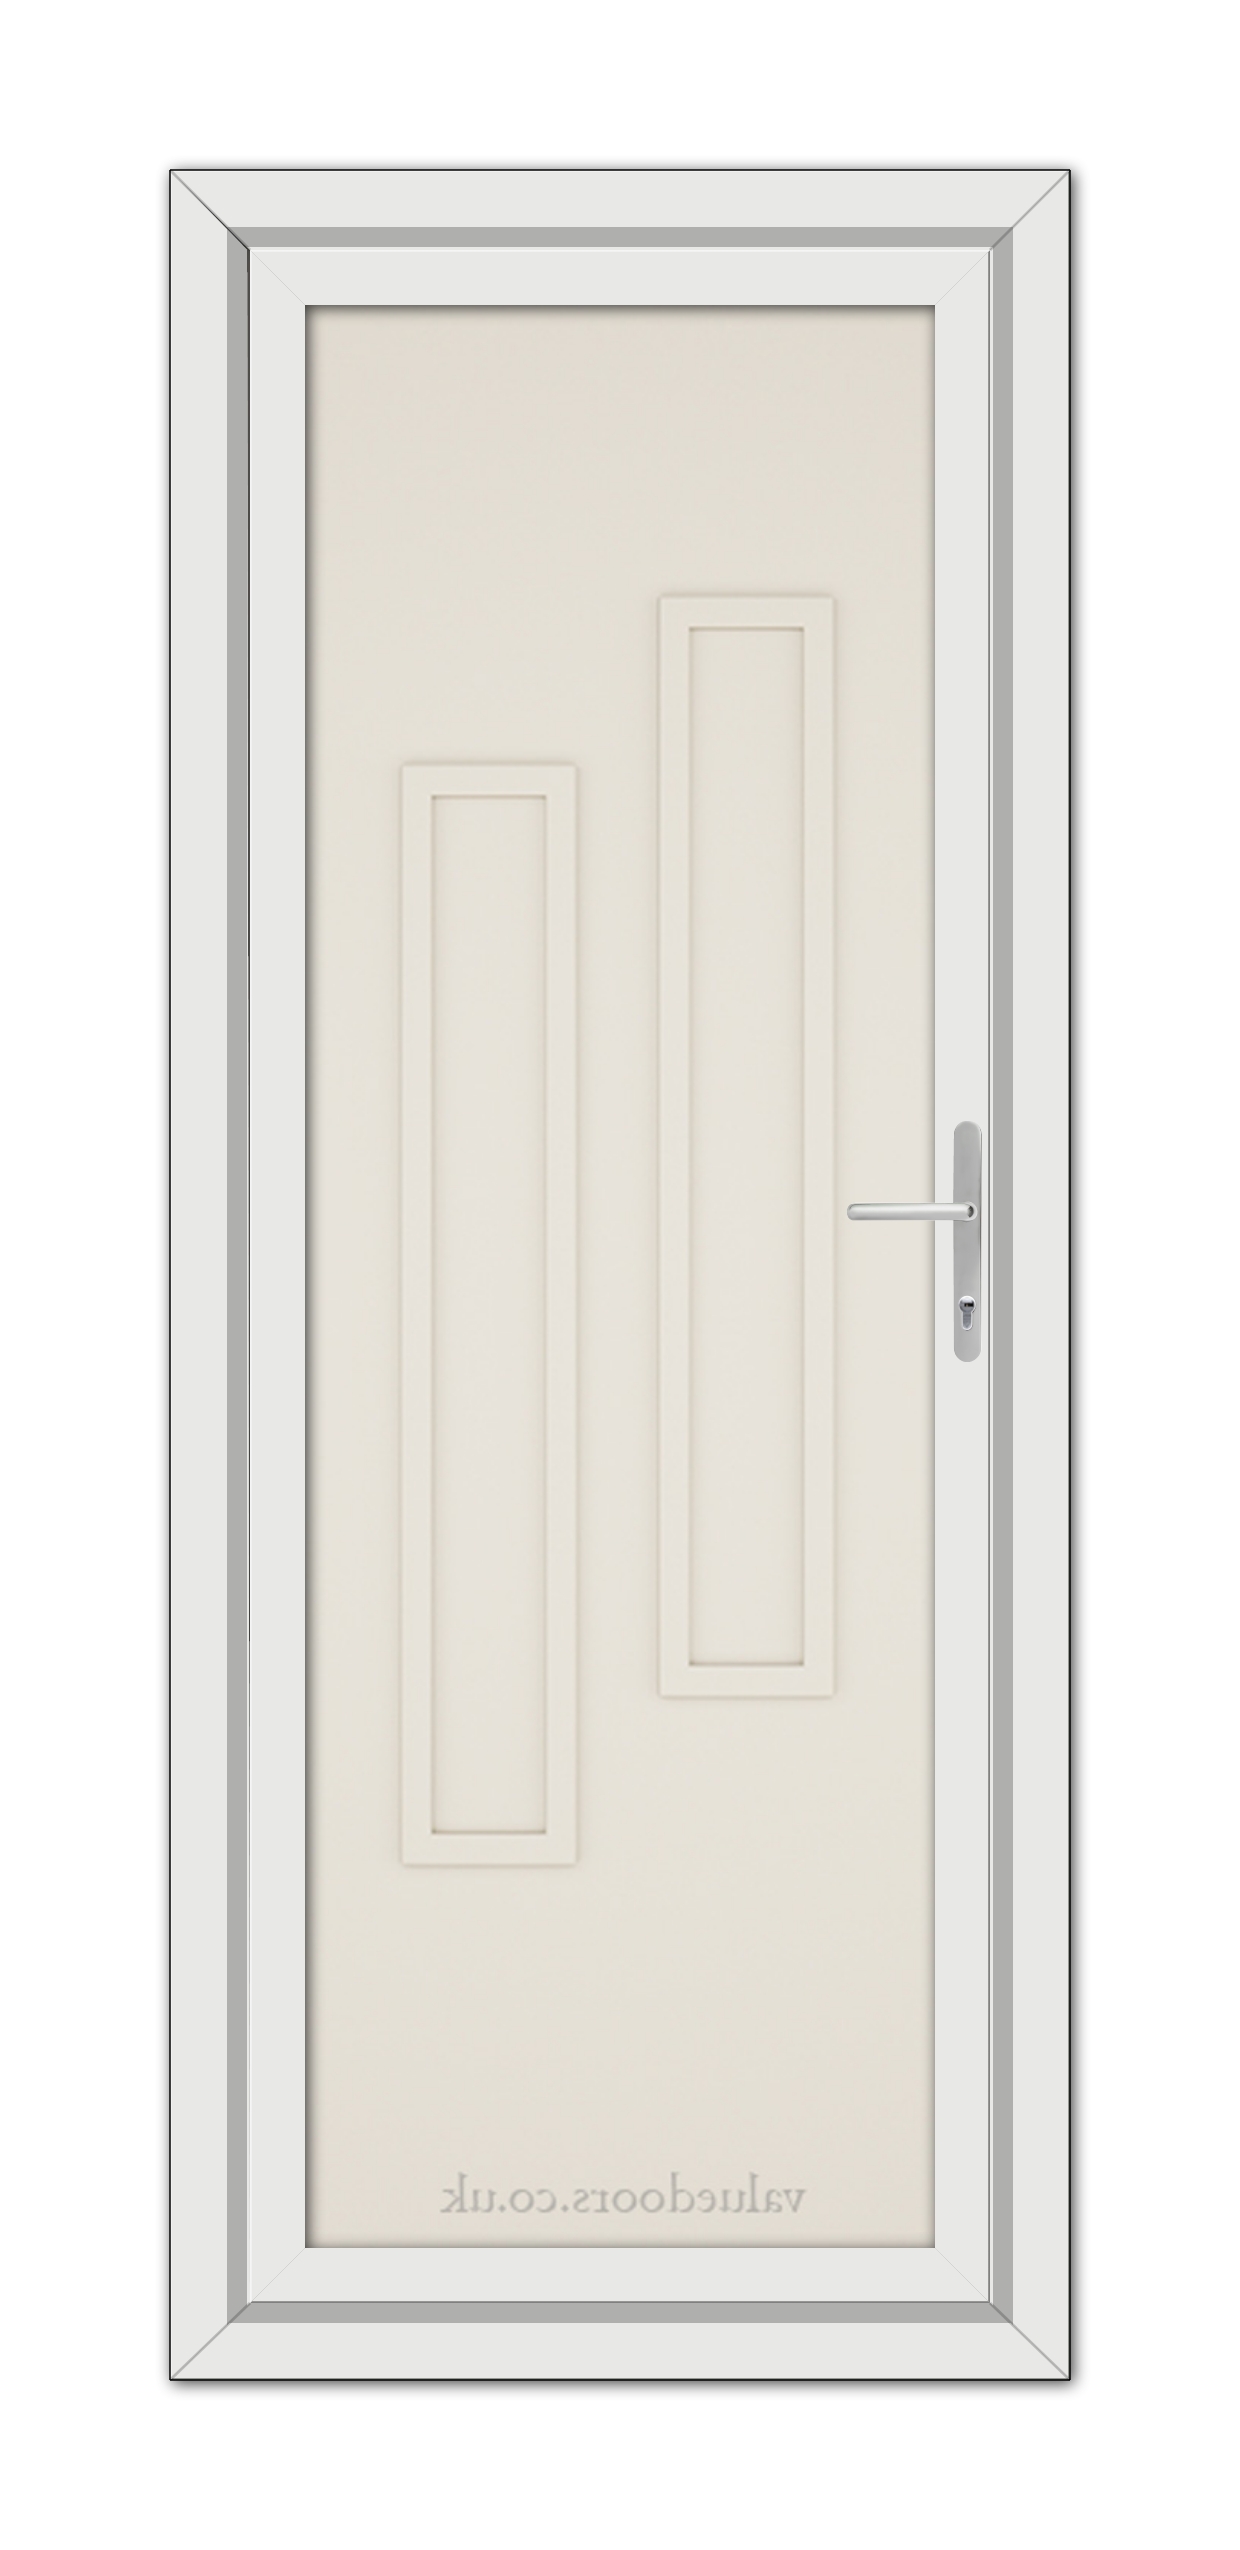 A vertical image of a closed, Cream Modern 5082 Solid uPVC Door with two rectangular panels and a metallic handle, set within a grey door frame.